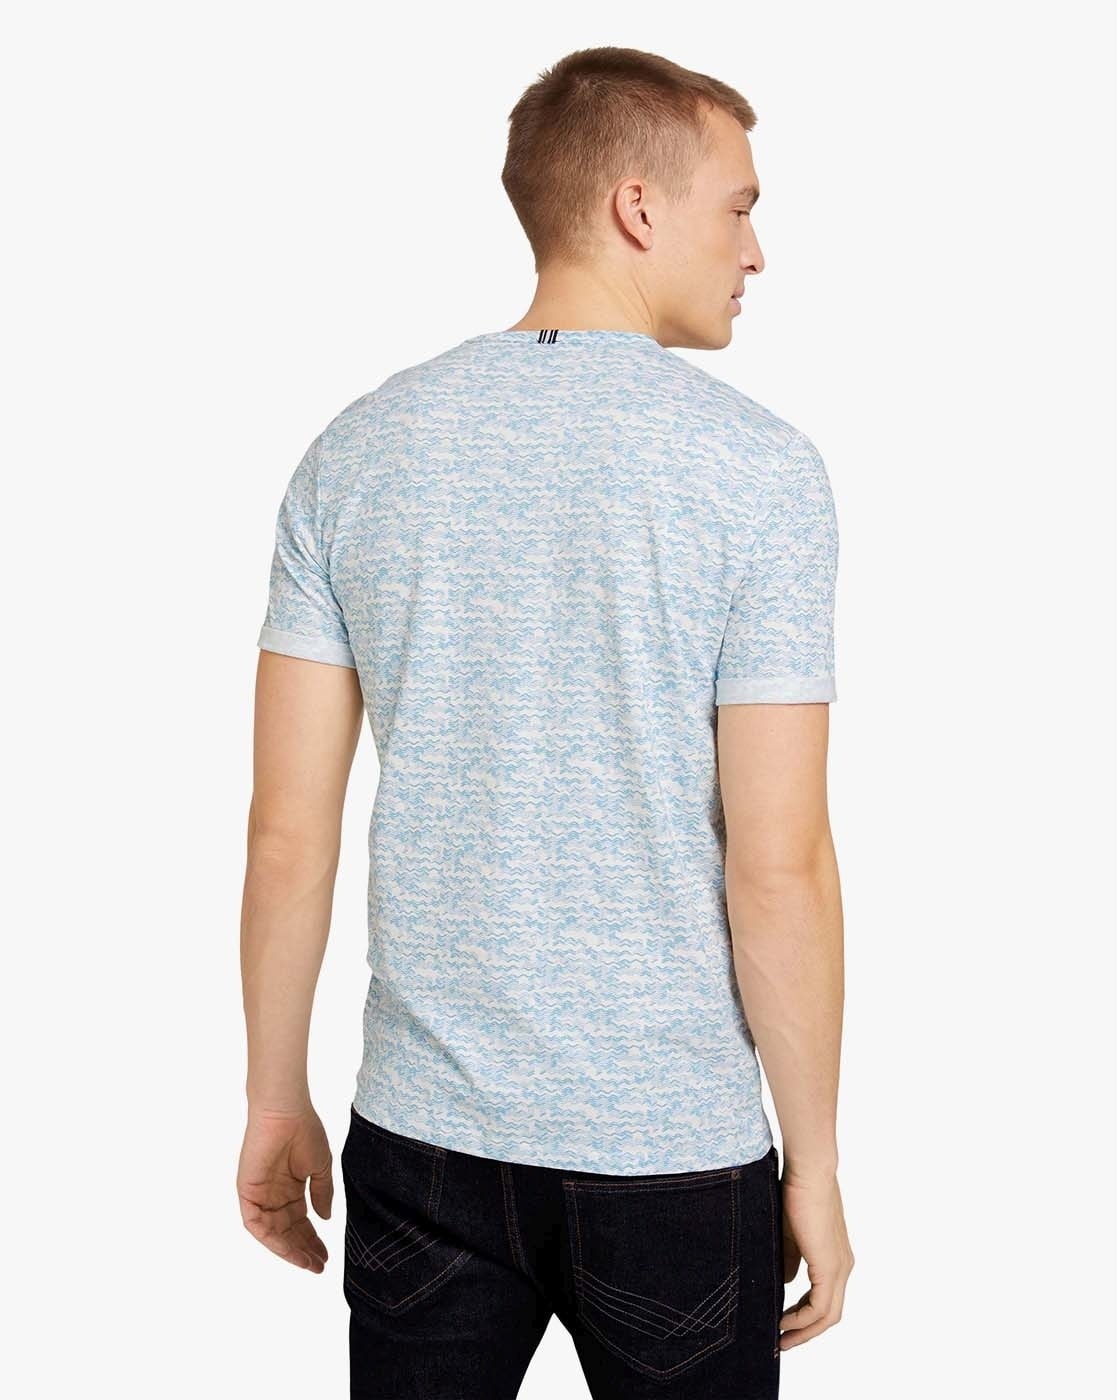 Buy Blue Tshirts for Men by Tom Tailor Online